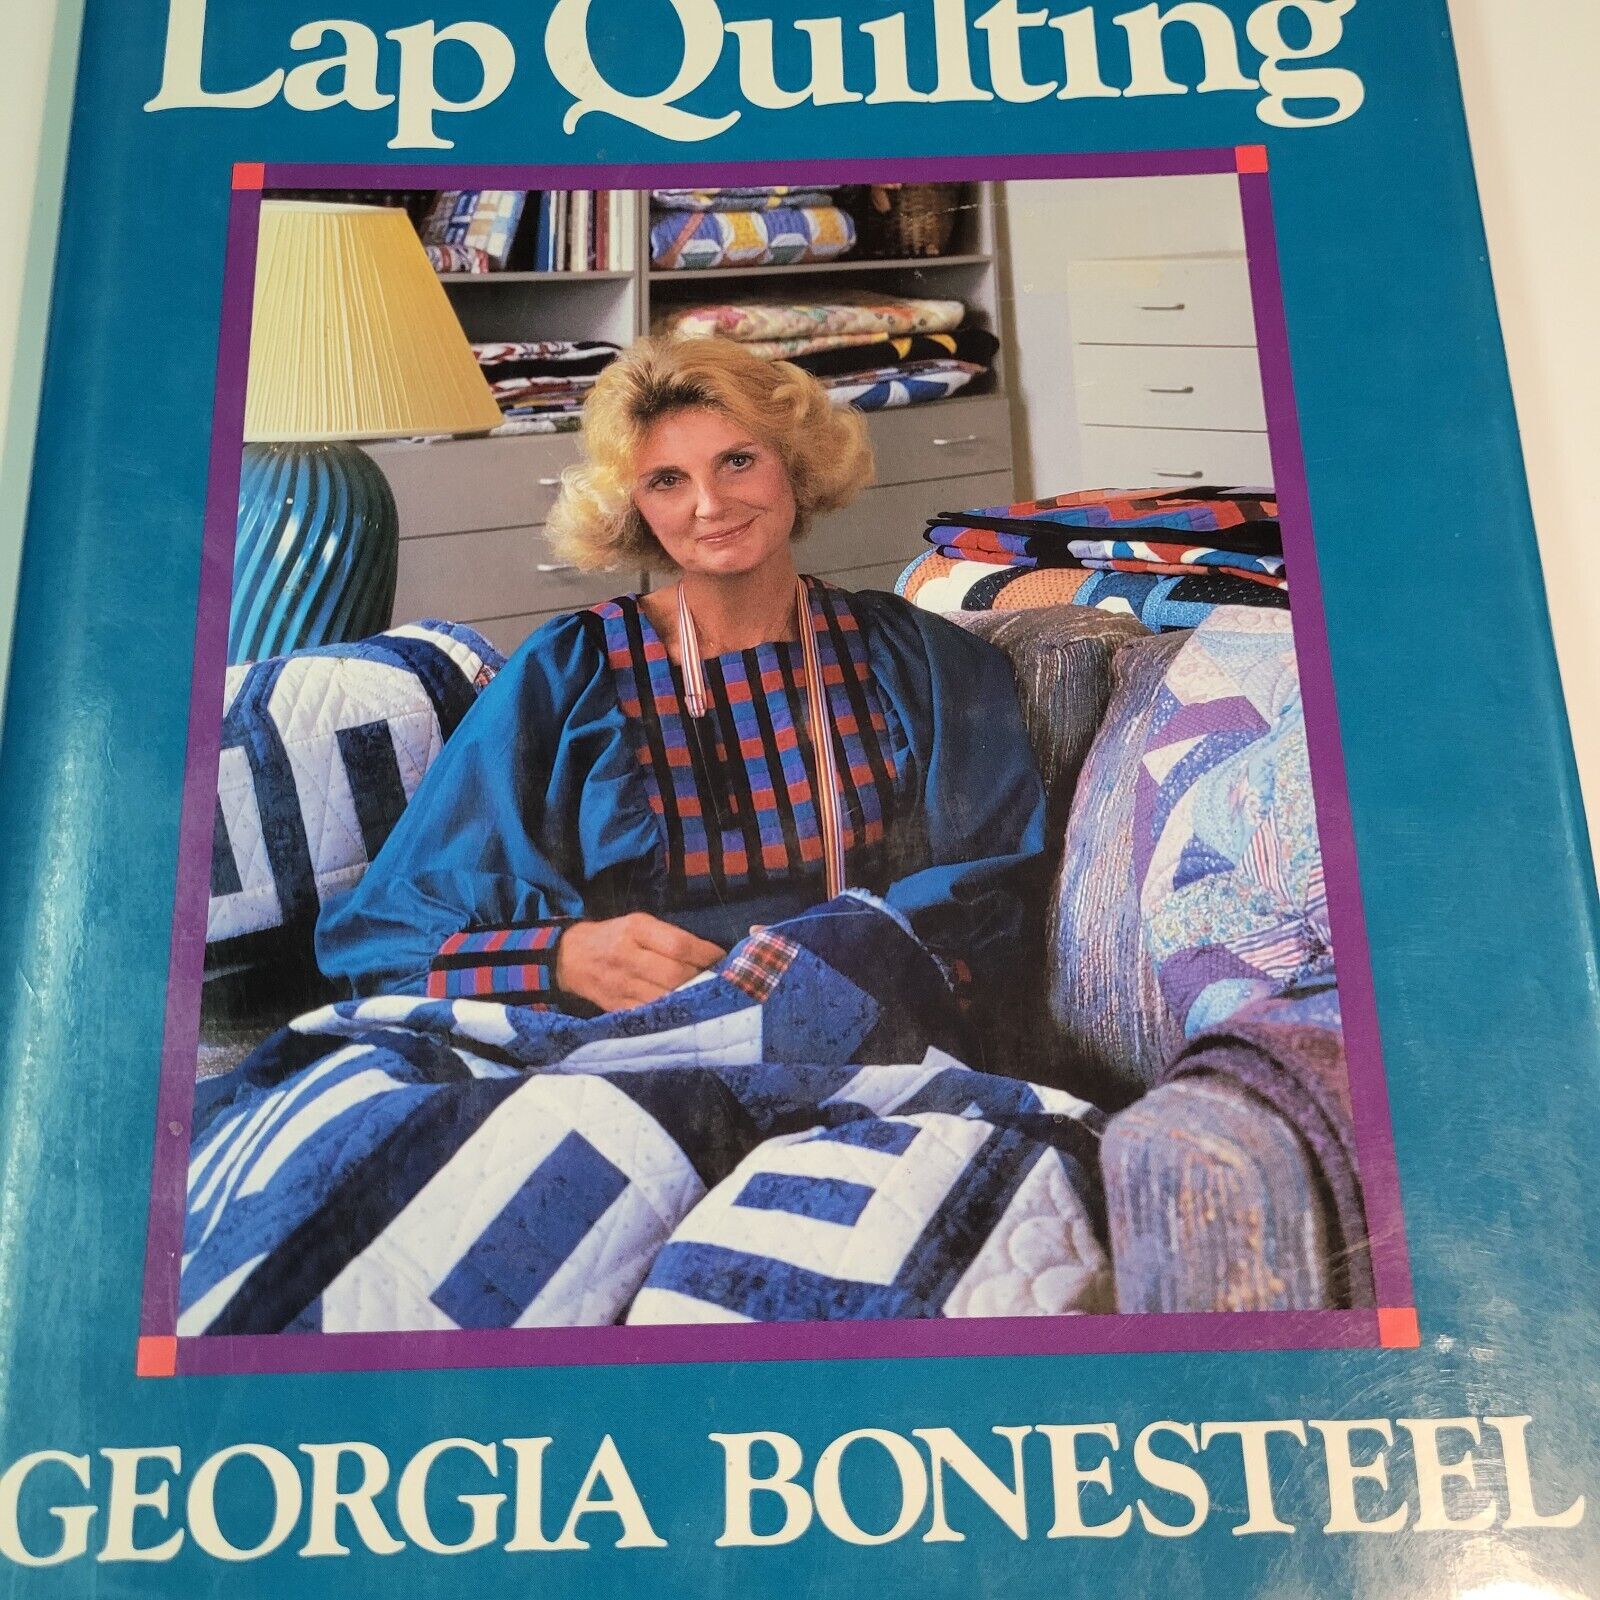 Lap Quilting Book By Georgia Bonesteel 1987 Oxmoor House 159 Pages Templets...